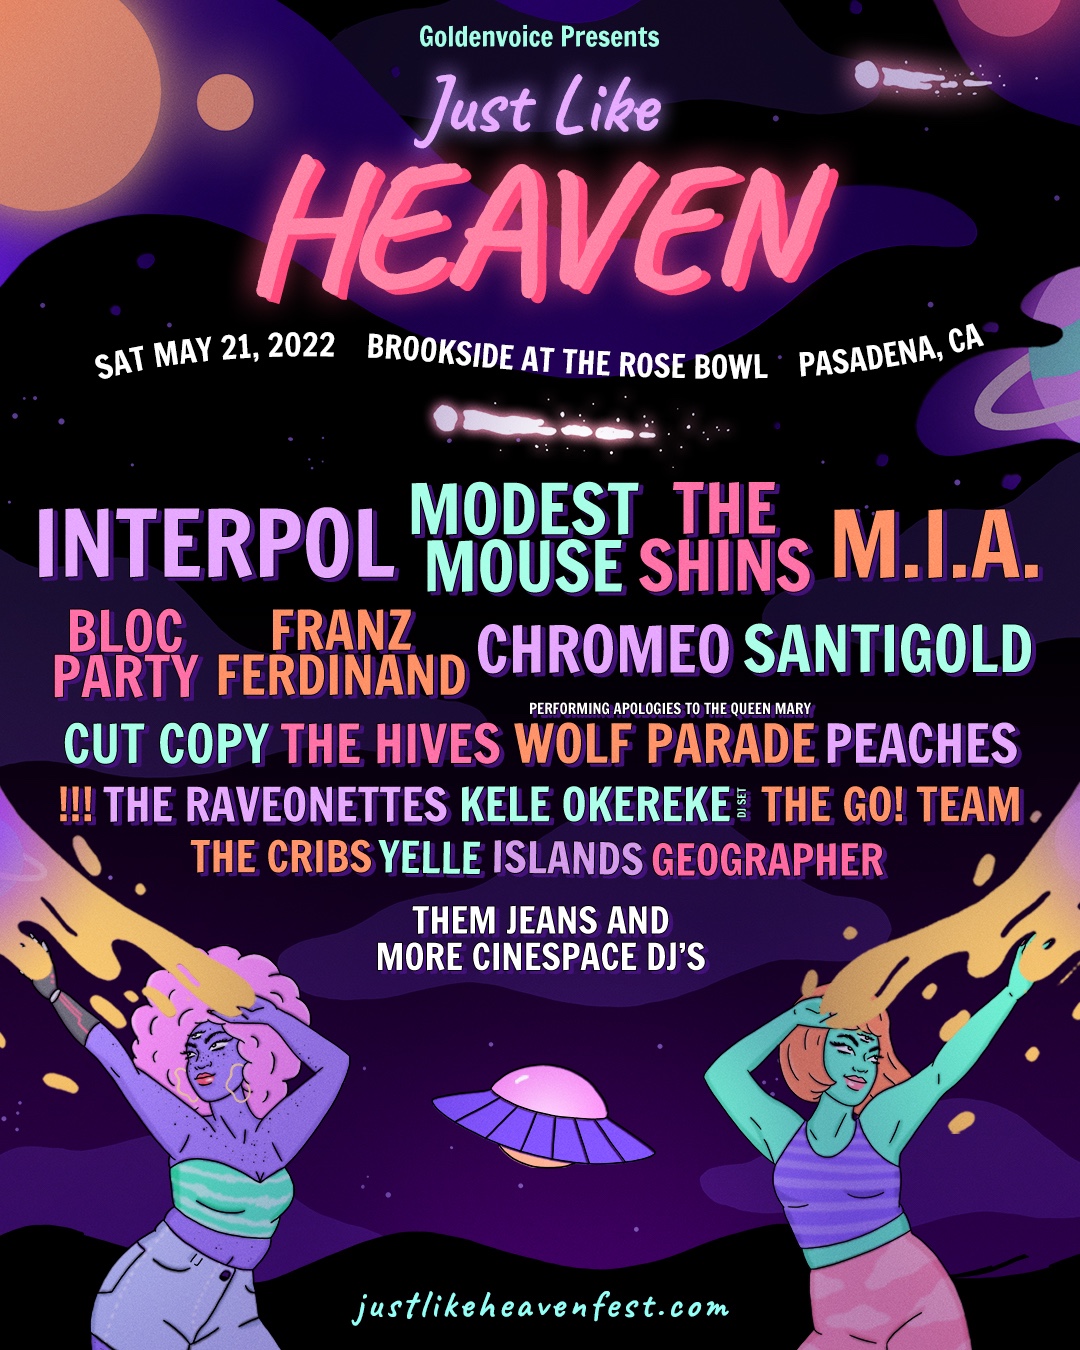 Just Like Heaven 2022 to Feature Interpol, Modest Mouse